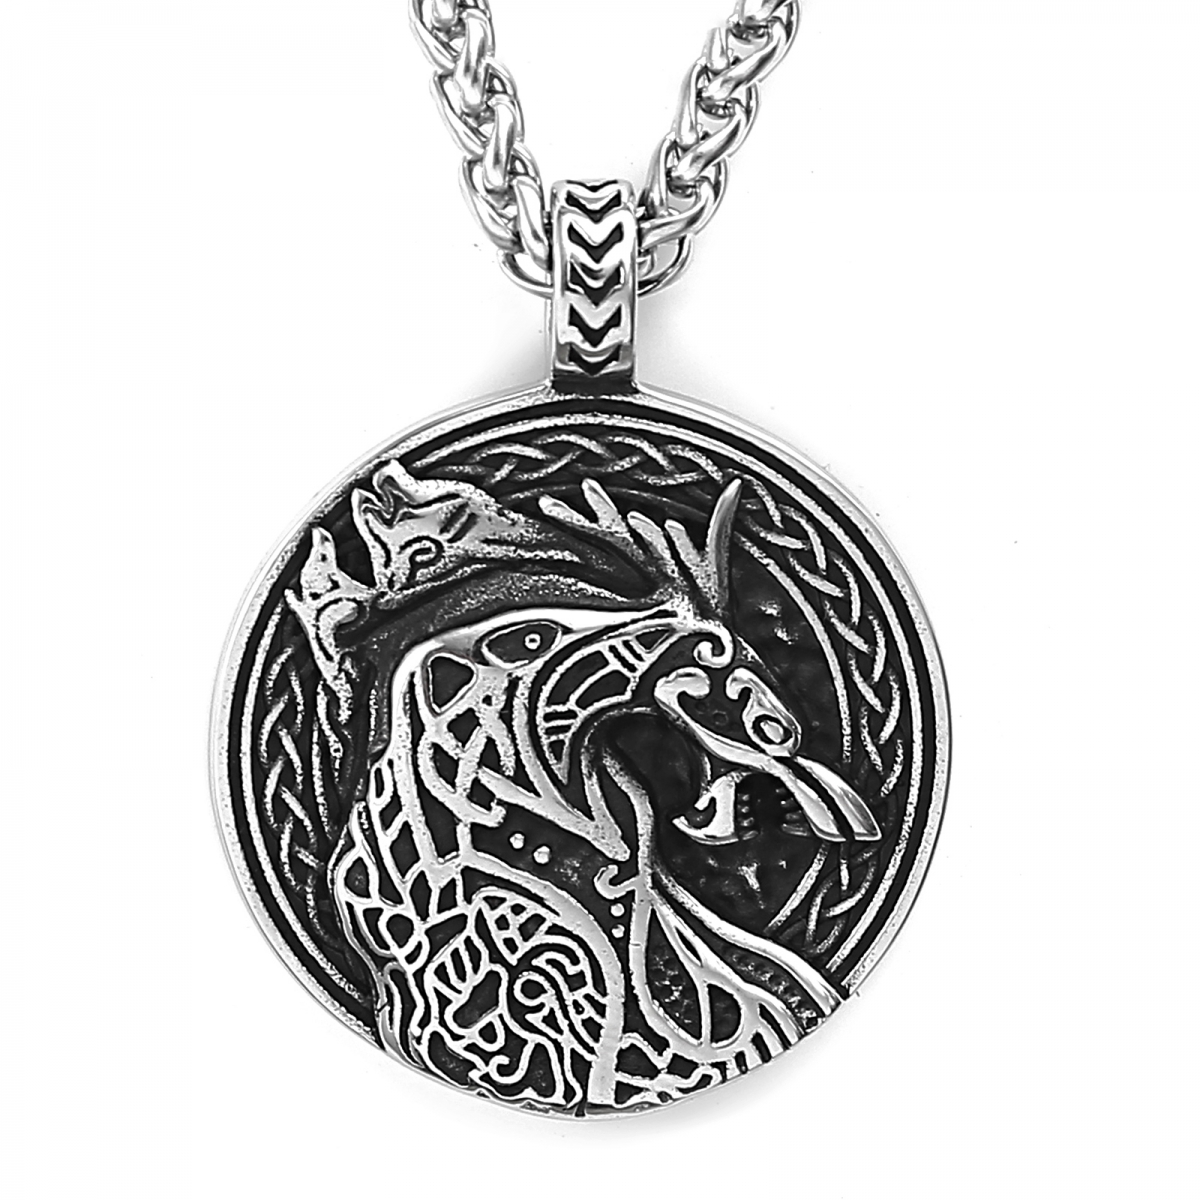 Fenrir Wolf Necklace US$2.9/PC-NORSECOLLECTION- Viking Jewelry,Viking Necklace,Viking Bracelet,Viking Rings,Viking Mugs,Viking Accessories,Viking Crafts